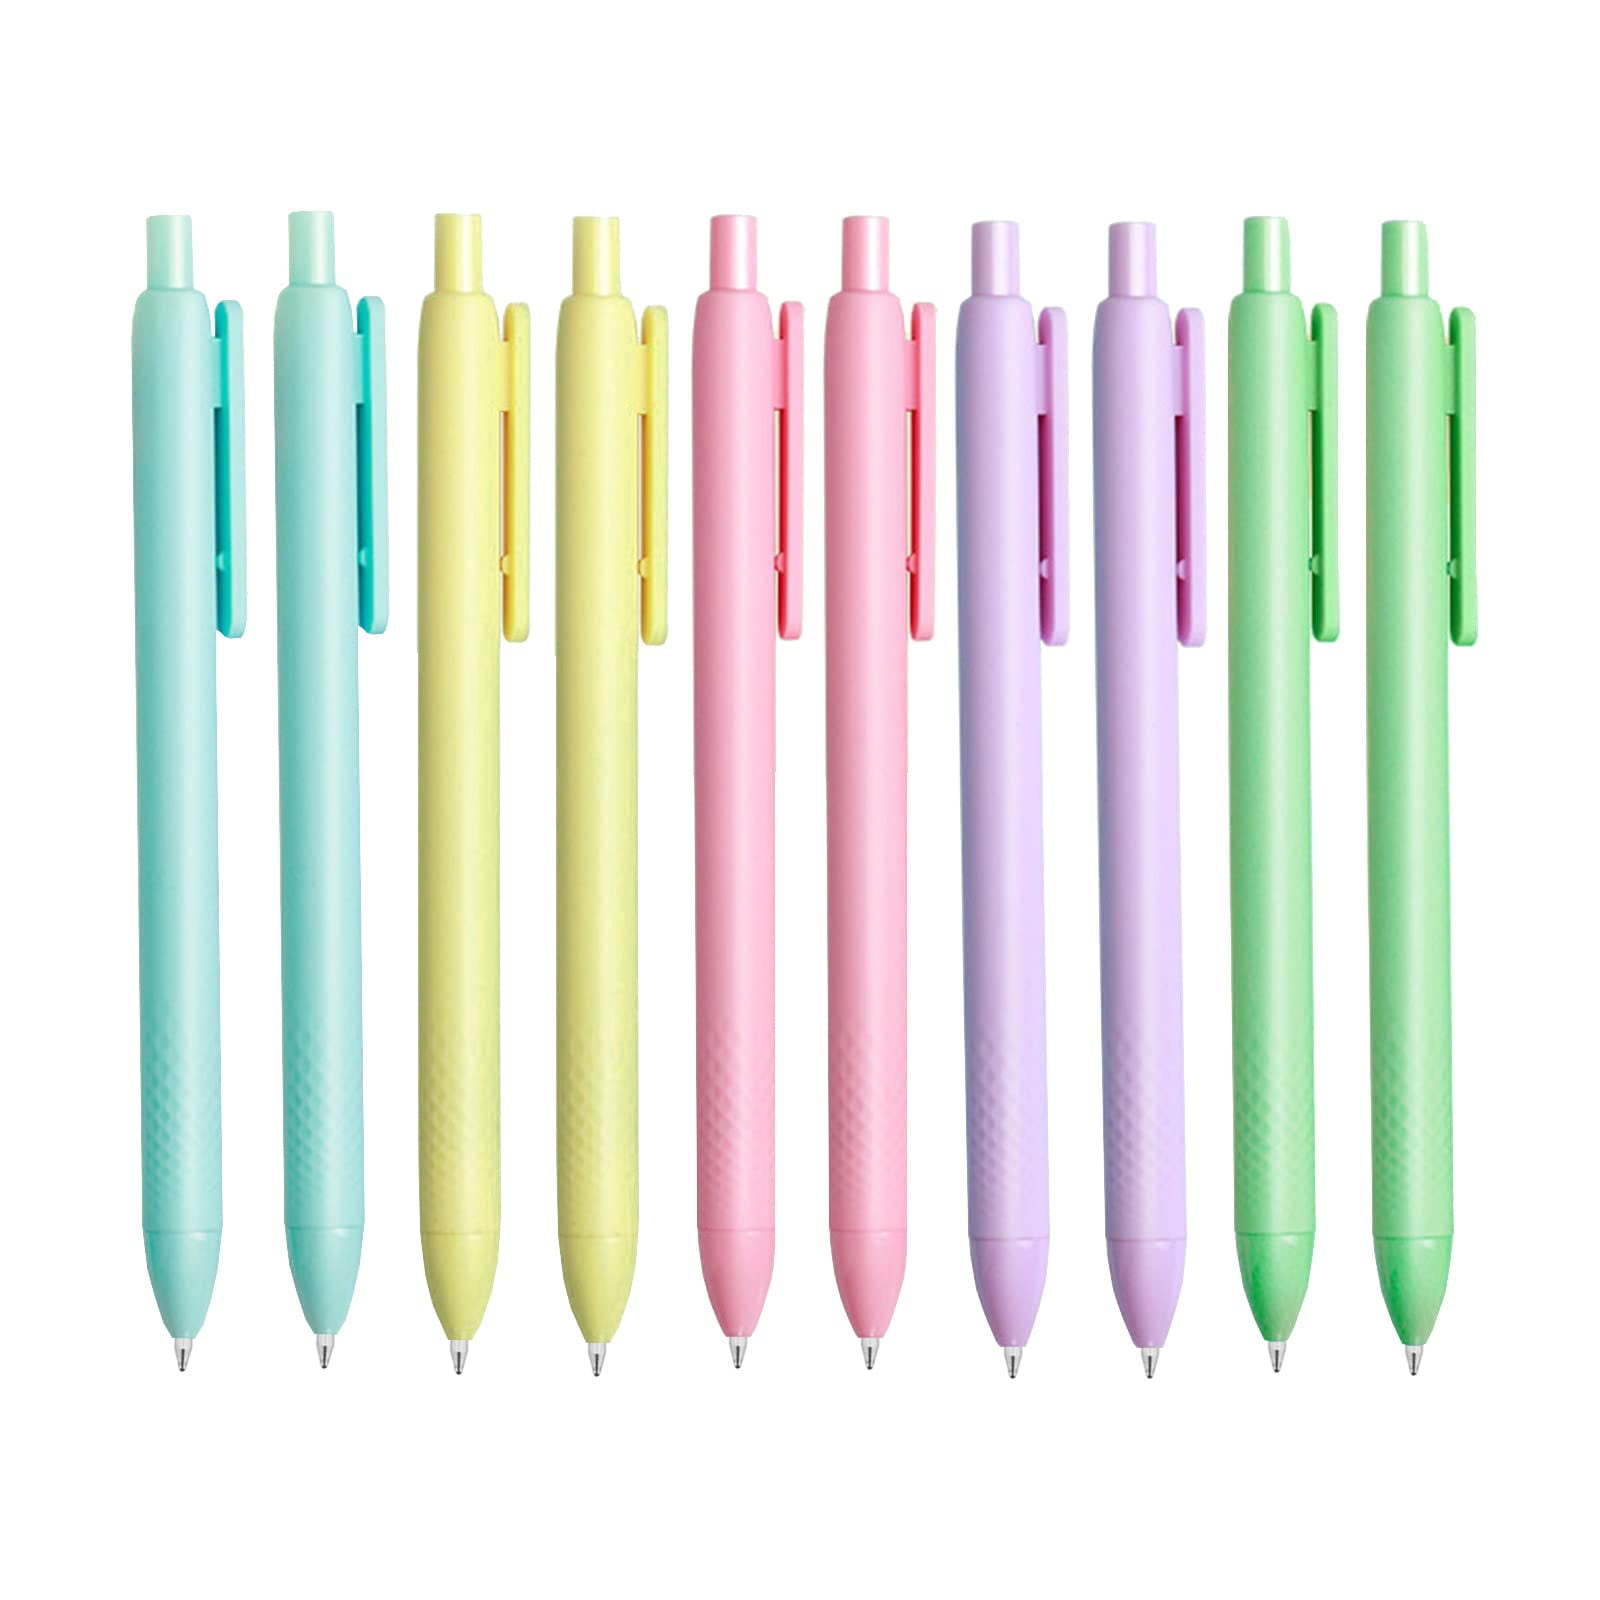 Ddaowanx Colored Gel Ink Pens,9 Colors Pastel Retractable Pretty Journaling  Pens, Medium Point 0.7 mm Gift Pens,Cute Highlighters School Supplies